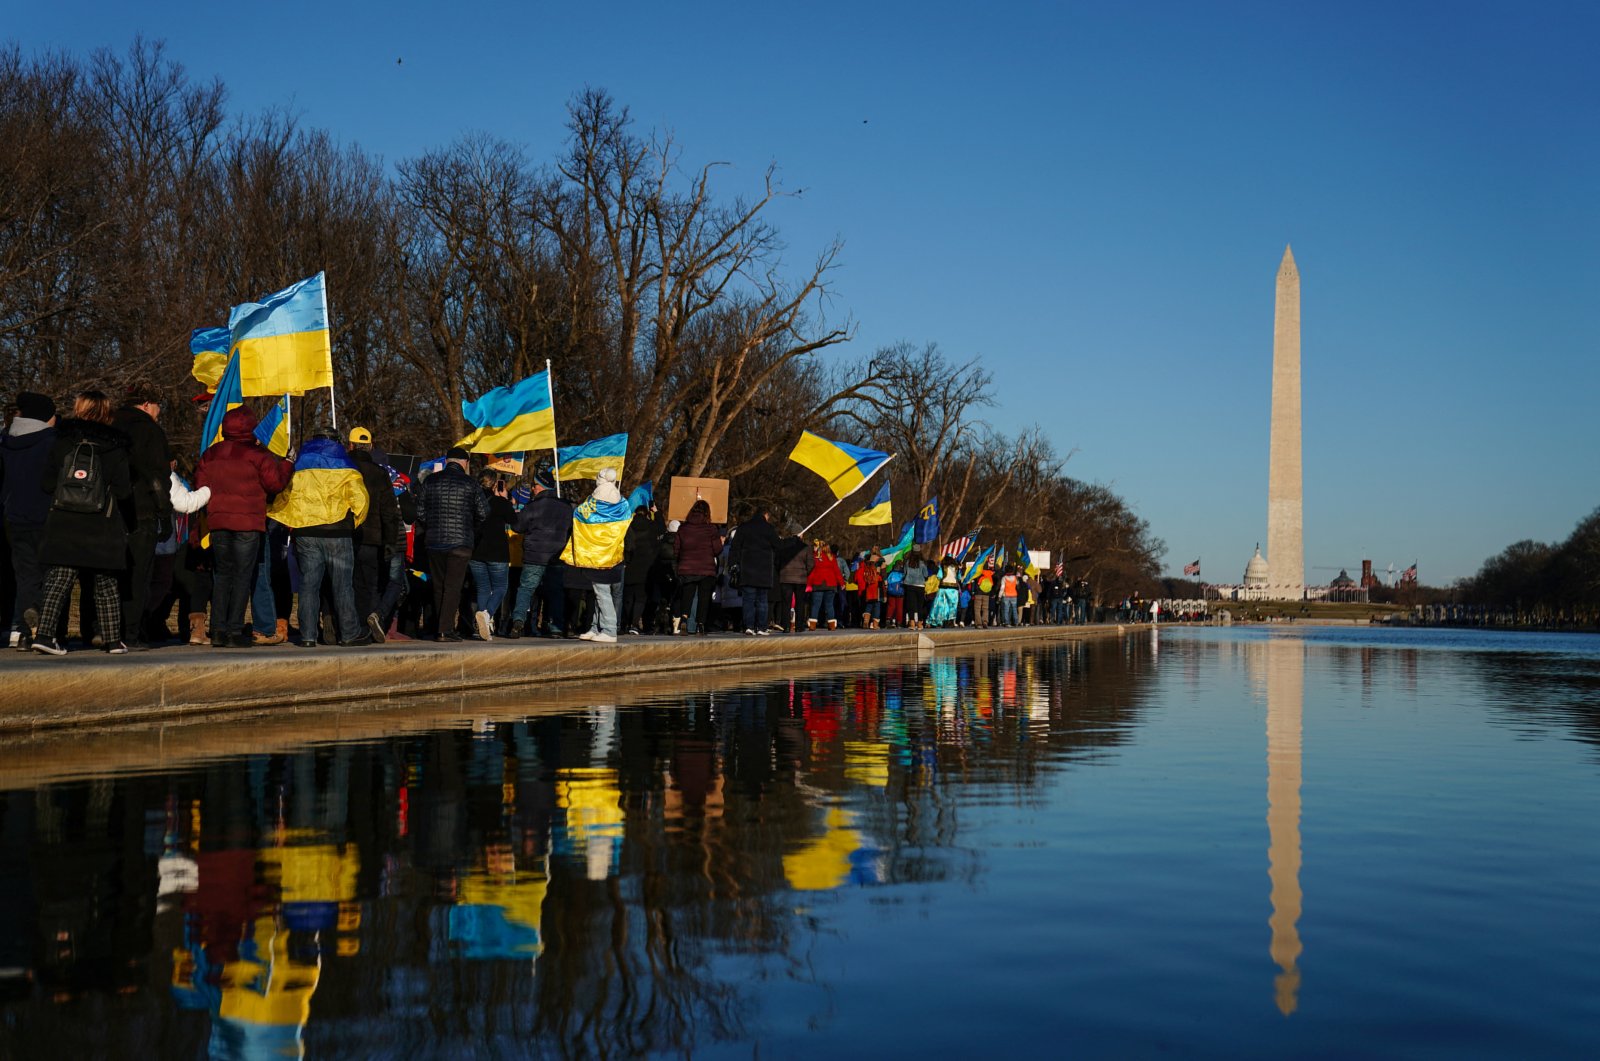 Demonstrators march along the National Mall from the Lincoln Memorial to the White House during a "Stand with Ukraine" rally in Washington, U.S., Feb. 20, 2022. (Reuters Photo)